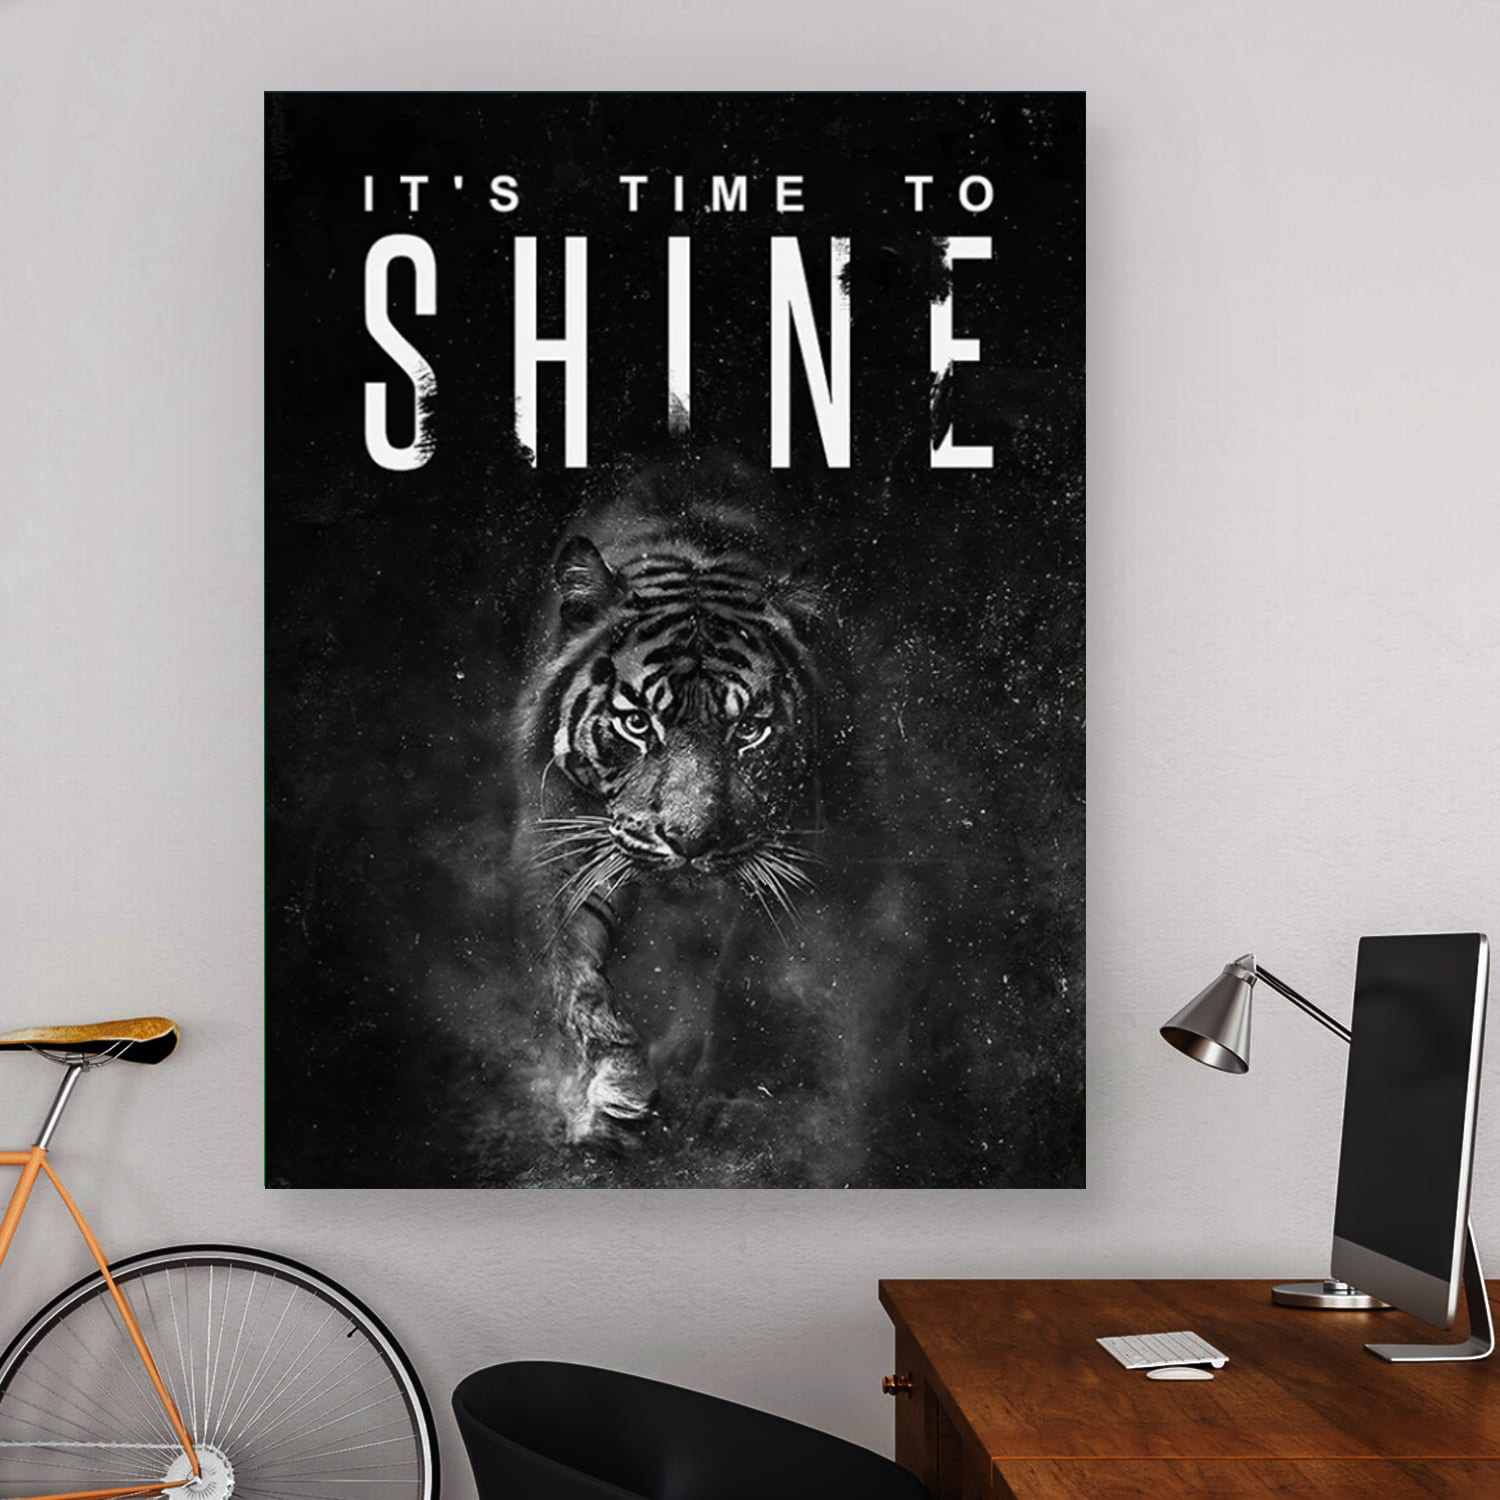 It's Your Time to Shine - Stock Buddies -Canvas Wraps